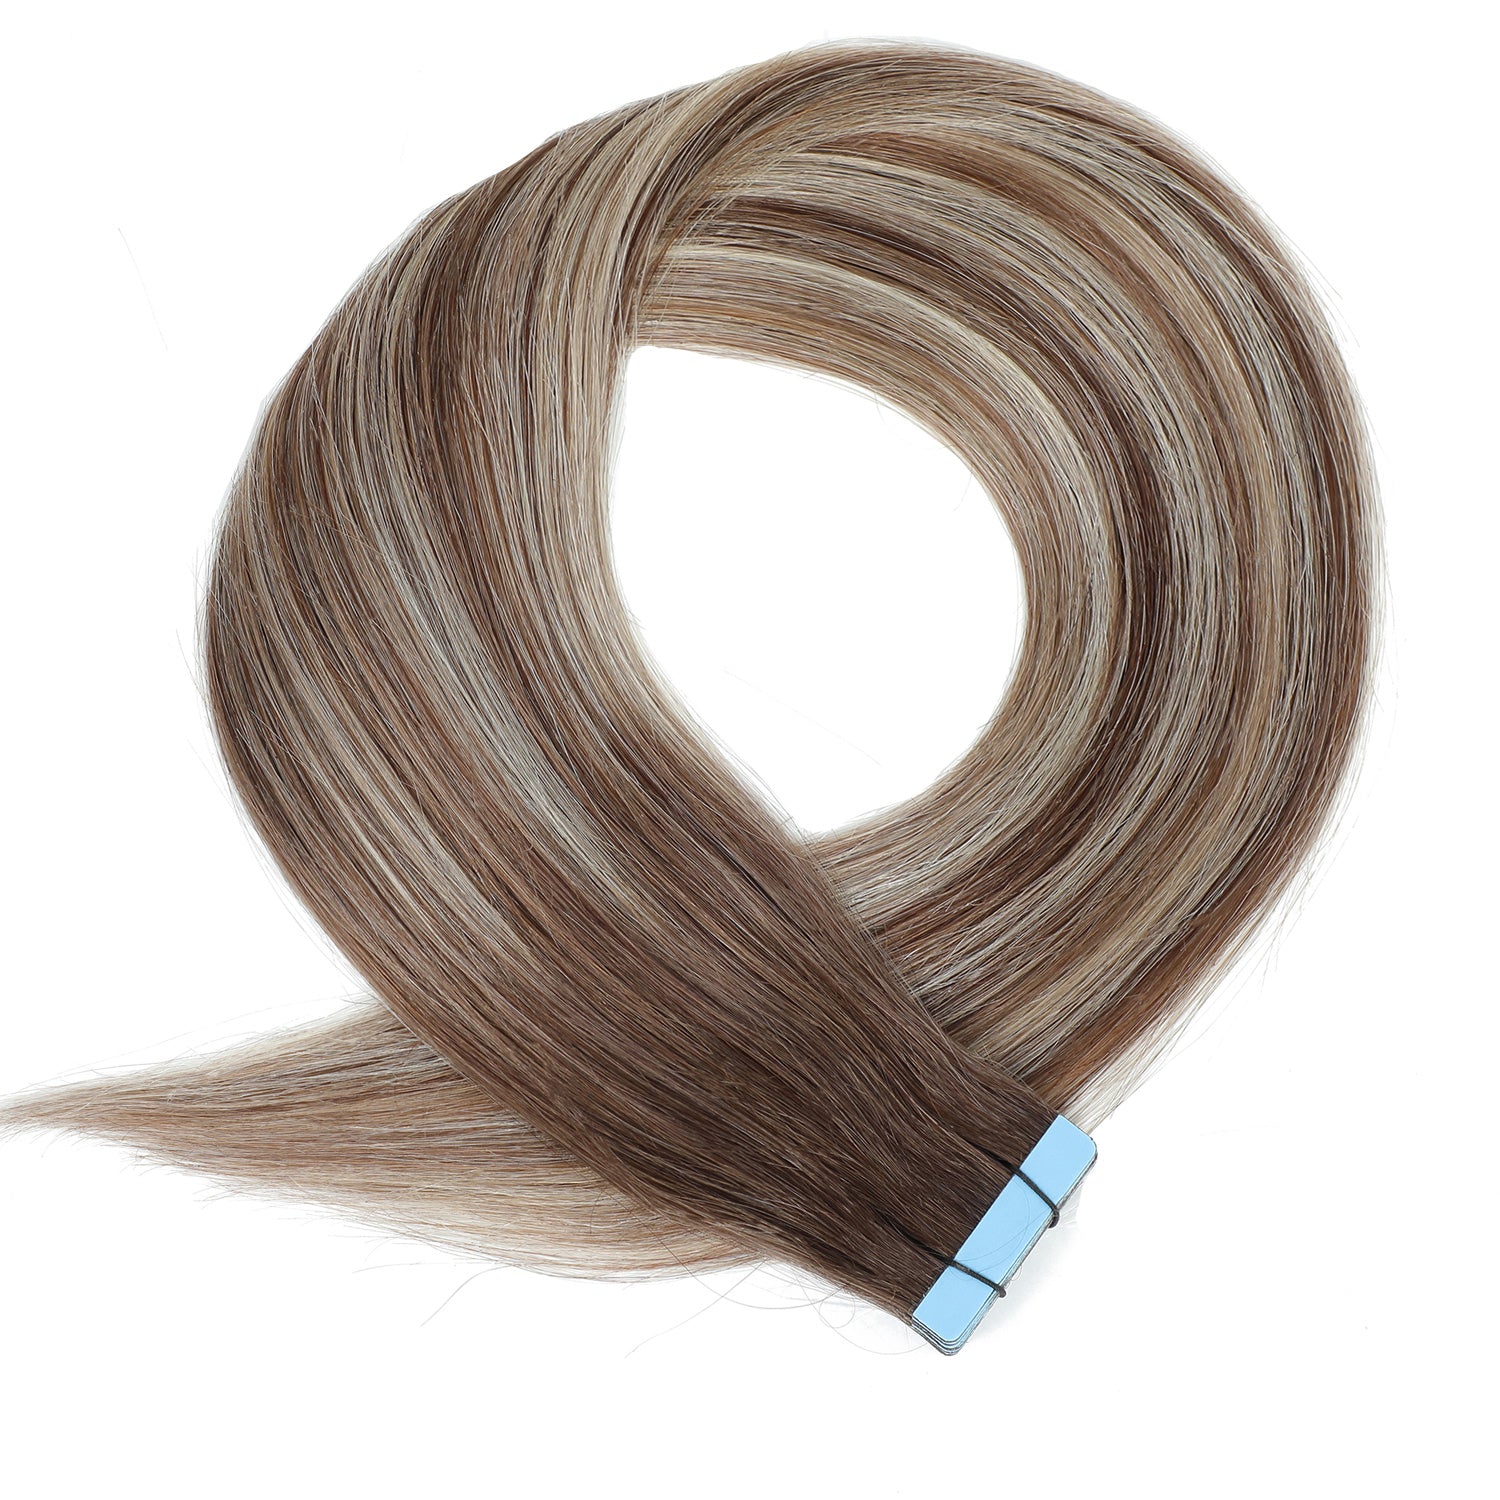 Remy Tape Hair Extensions. Enhance your hairstyle with Human Hair Extensions, designed for a natural and voluminous finish. These tape extensions blend seamlessly with your natural hair, providing both length and volume